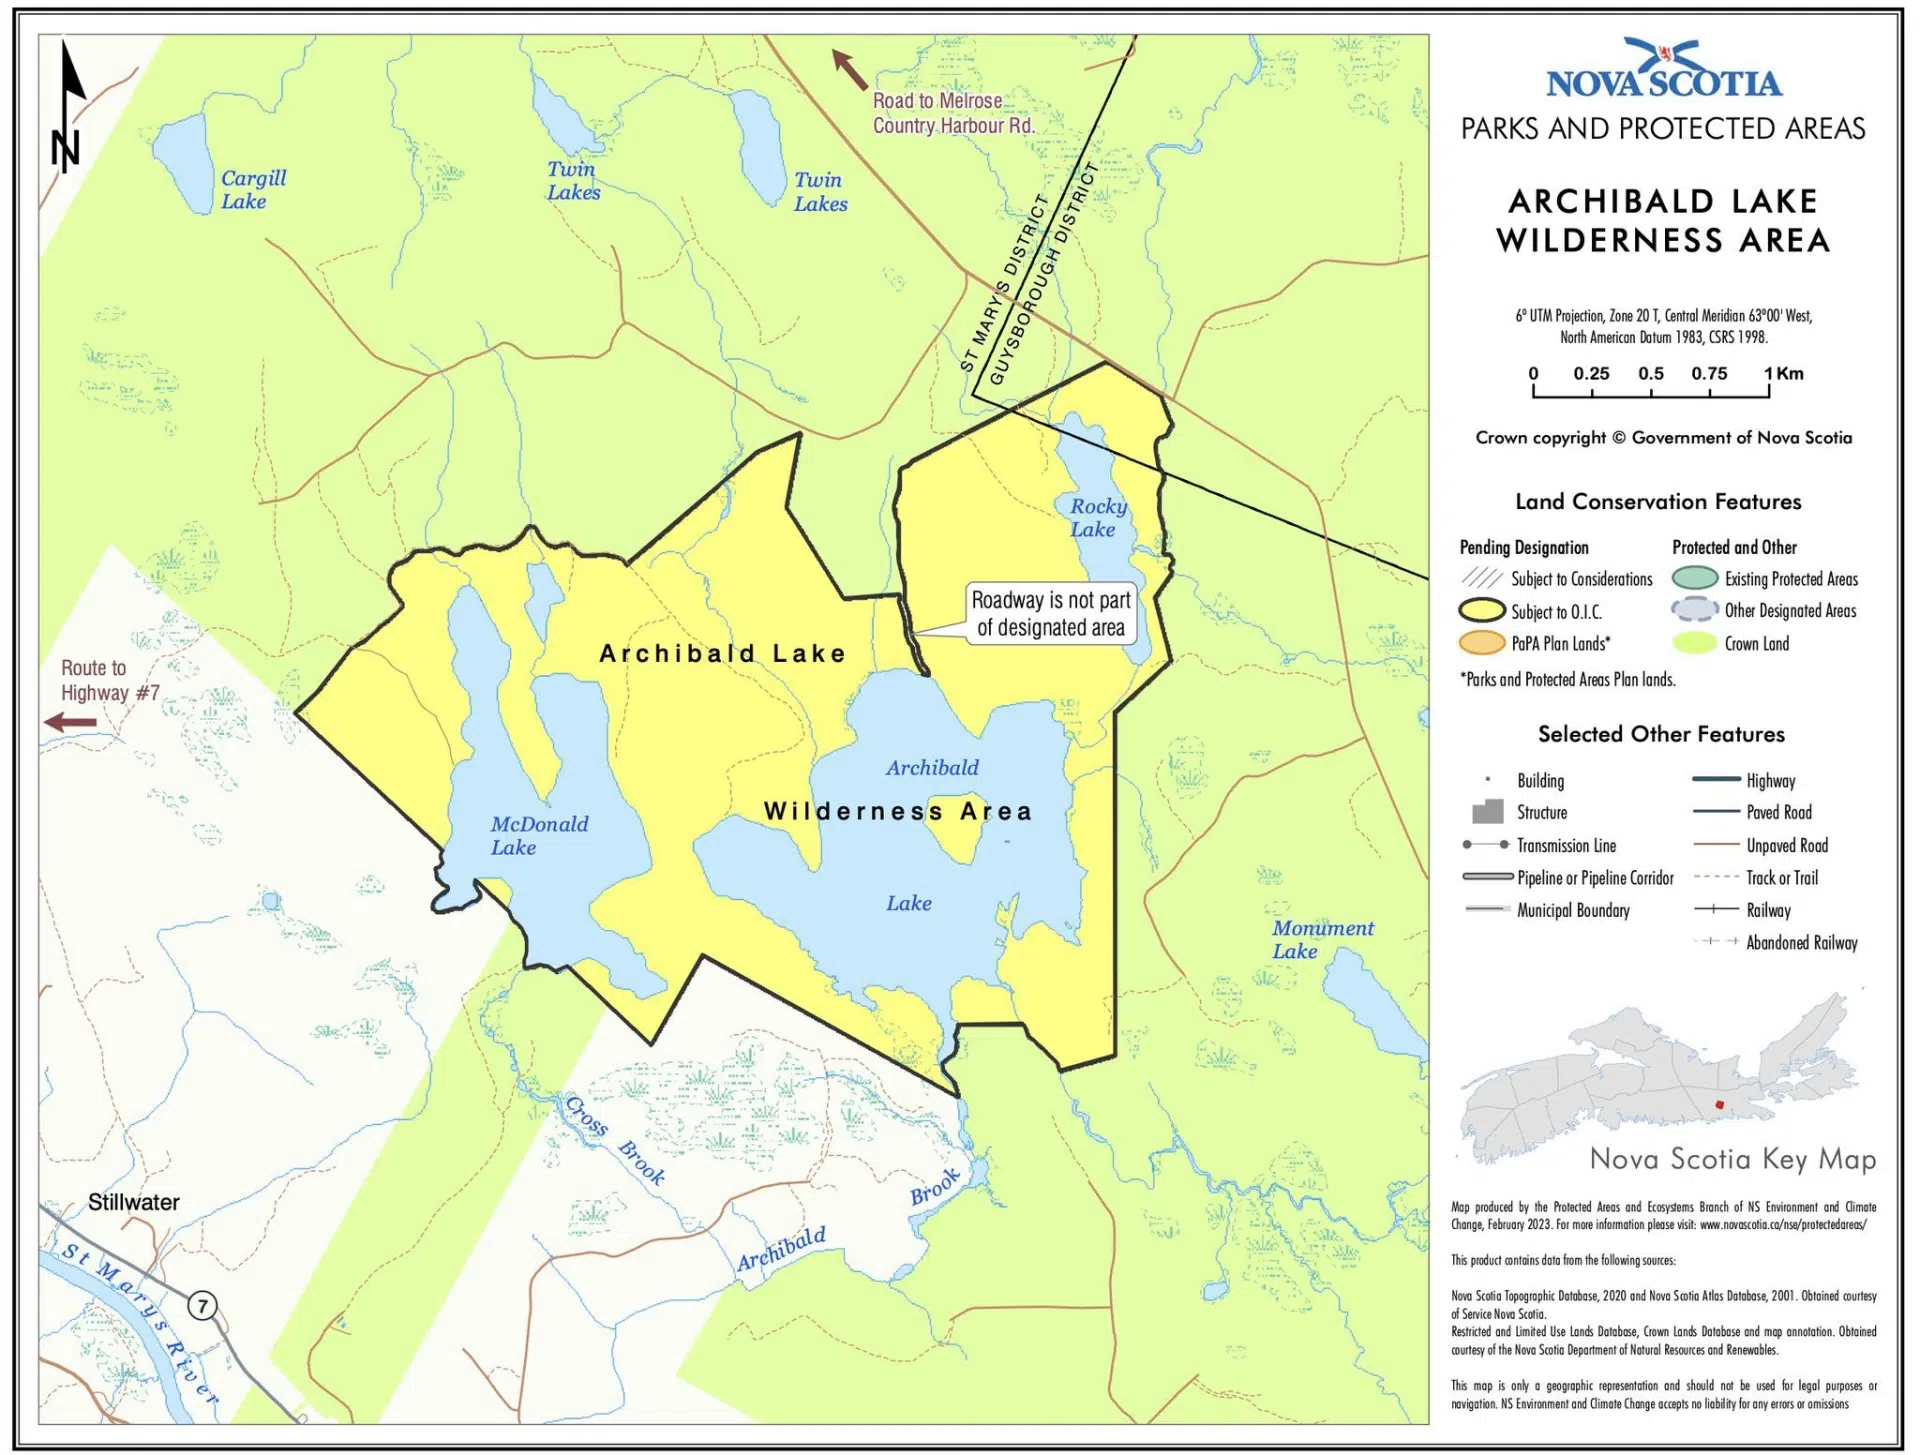 Ecology Action Centre Applauds Protected Archibald Lake Wilderness Area